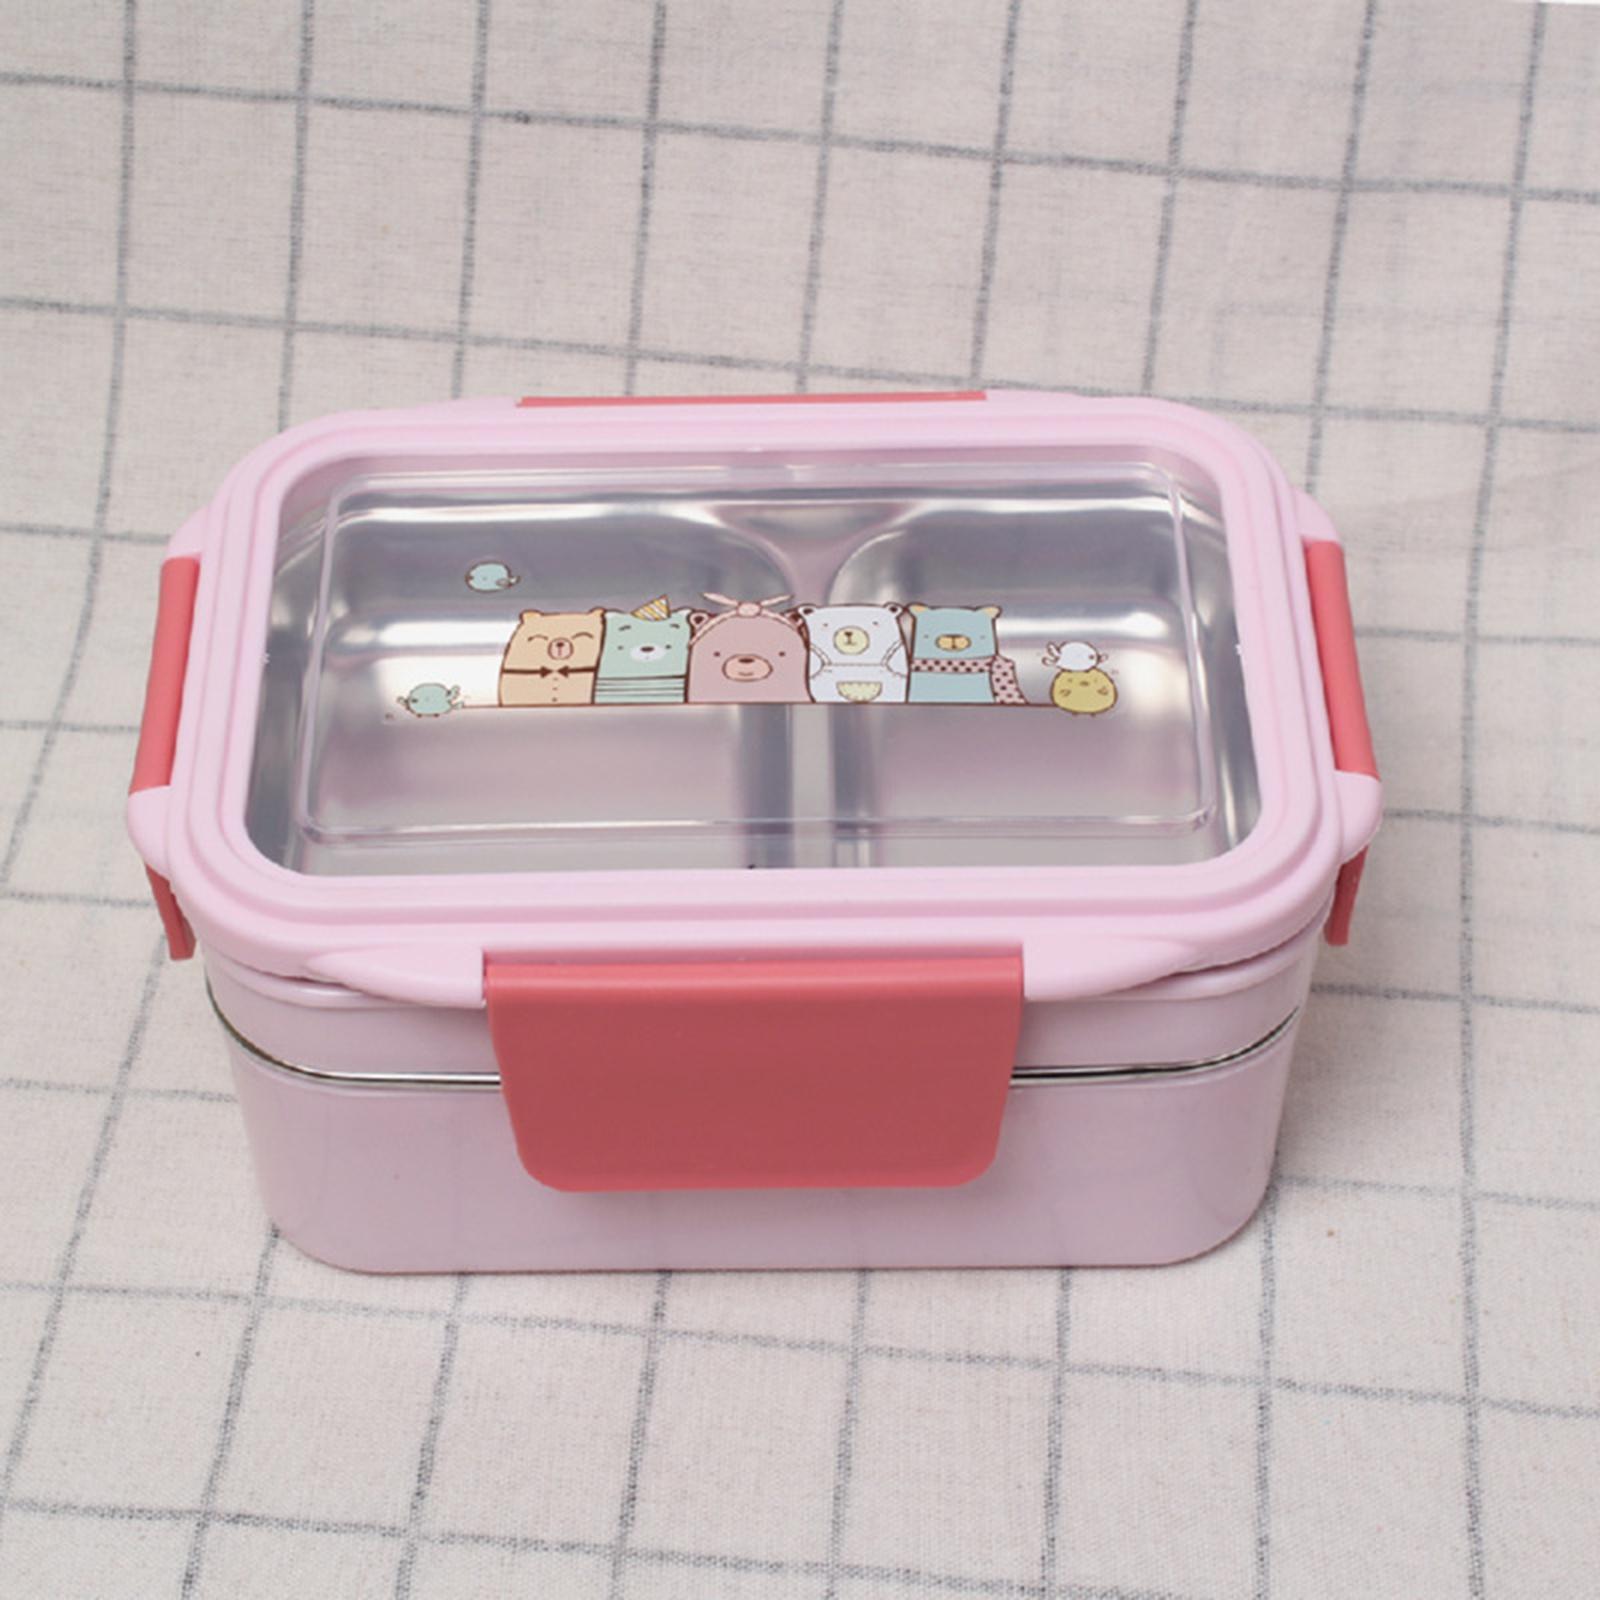 2 Layer Stainless Steel Bento Box Food Container for Outdoor Camping Hiking